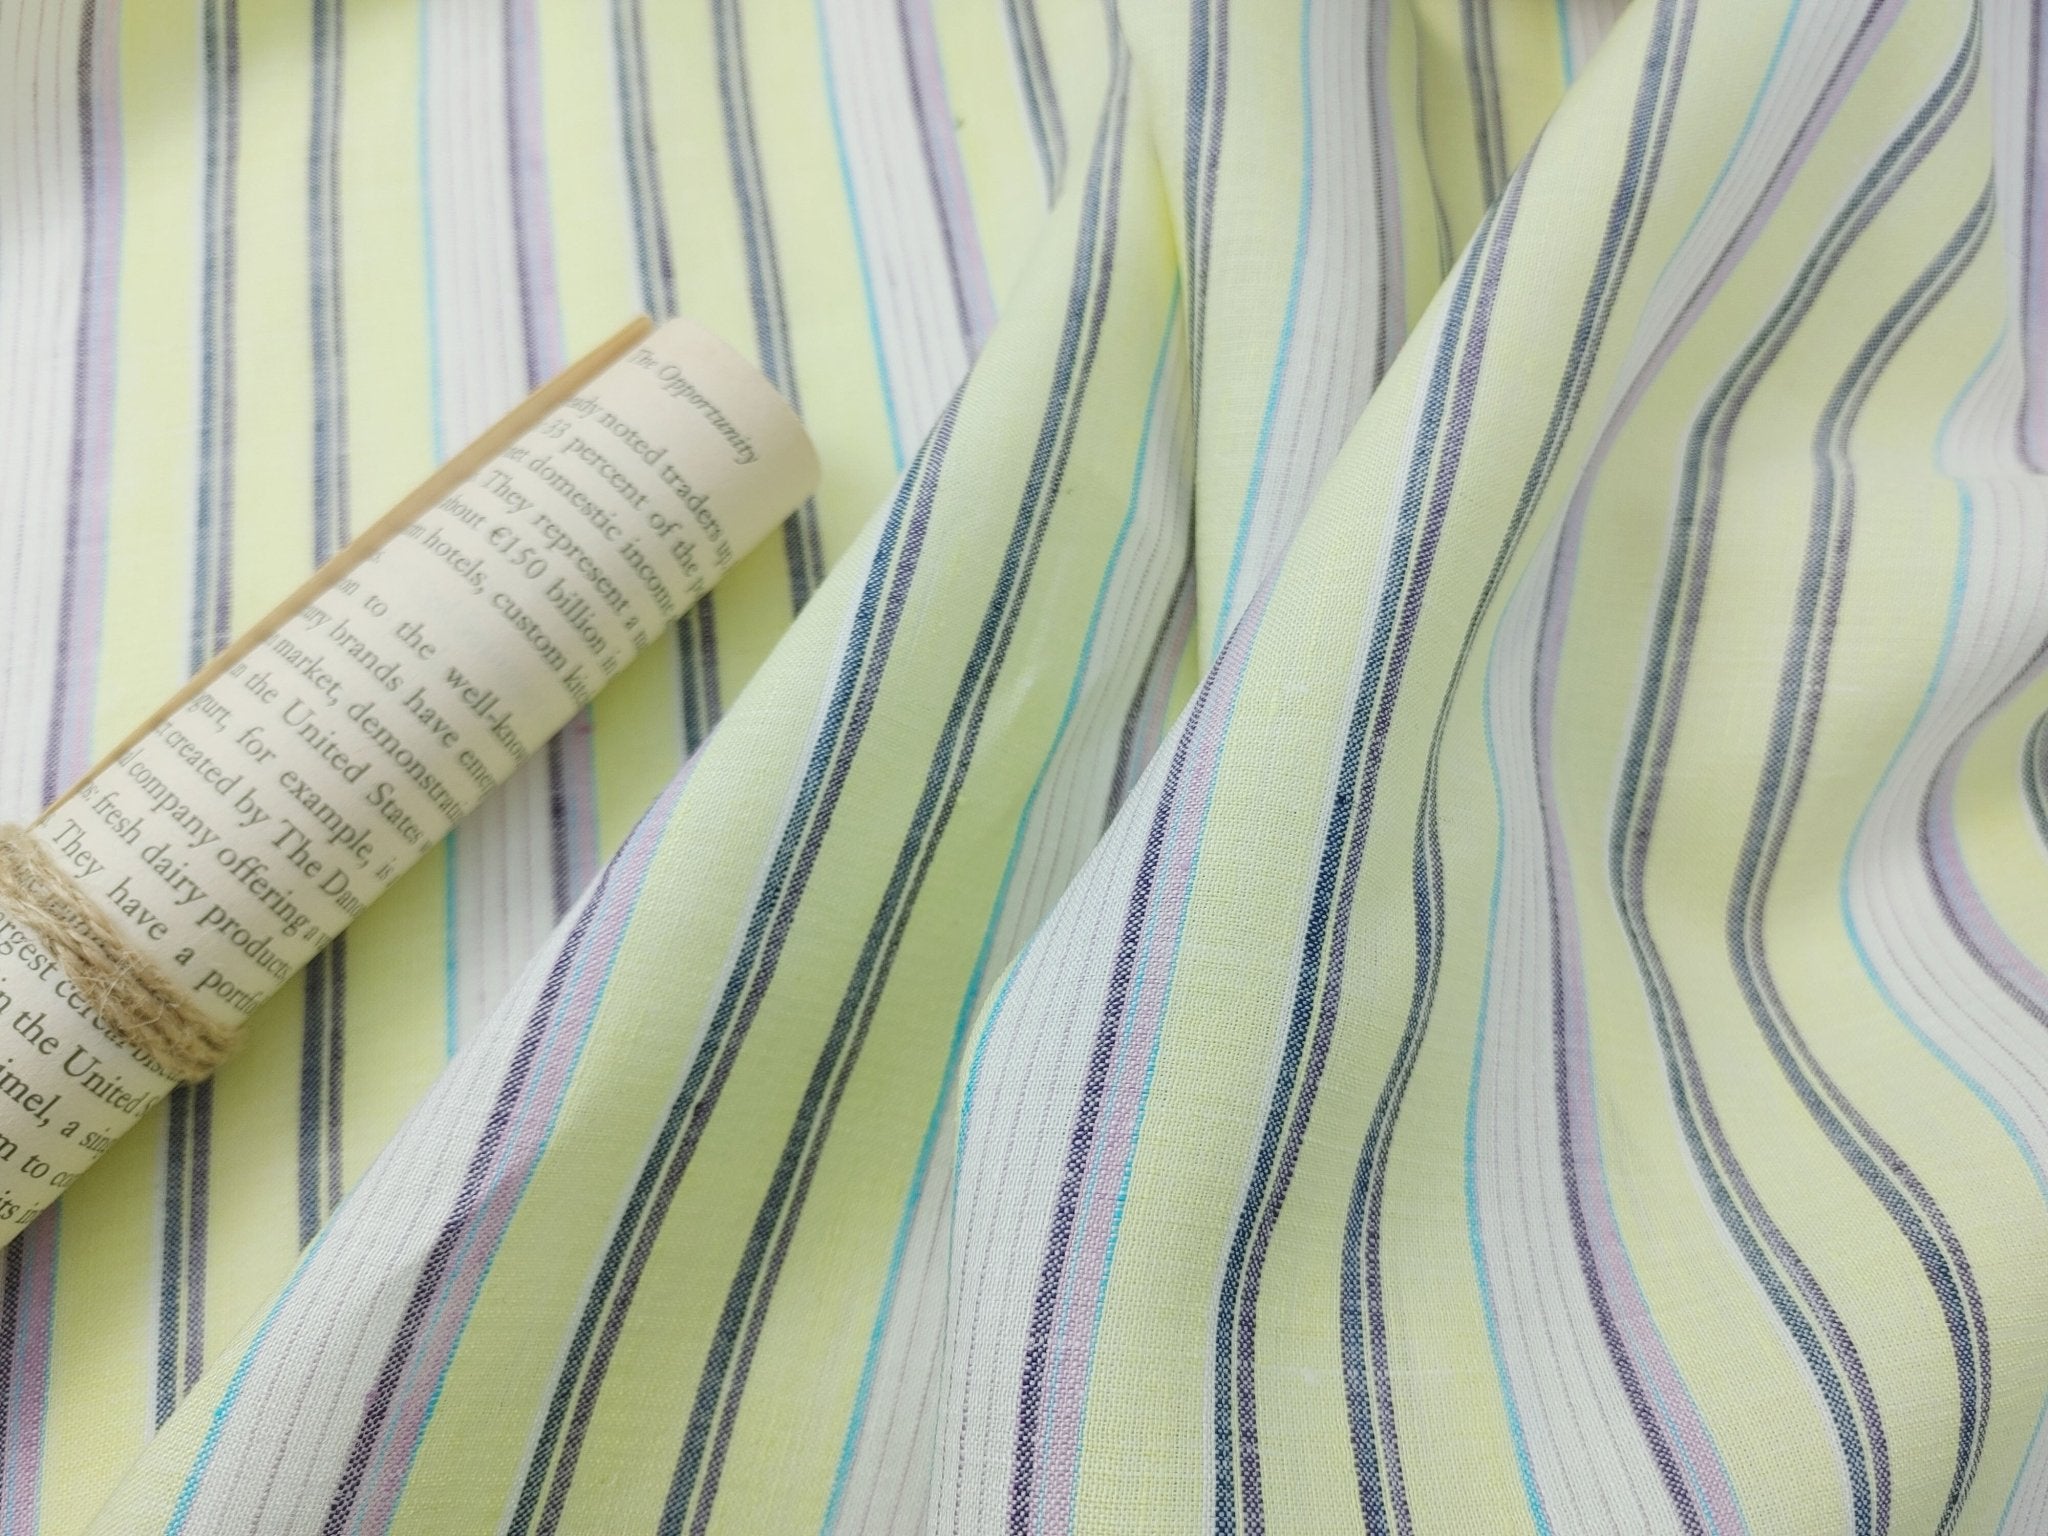 Light Weight Linen Ramie Fabric with Stripe Pattern 2106 - The Linen Lab - Yellow